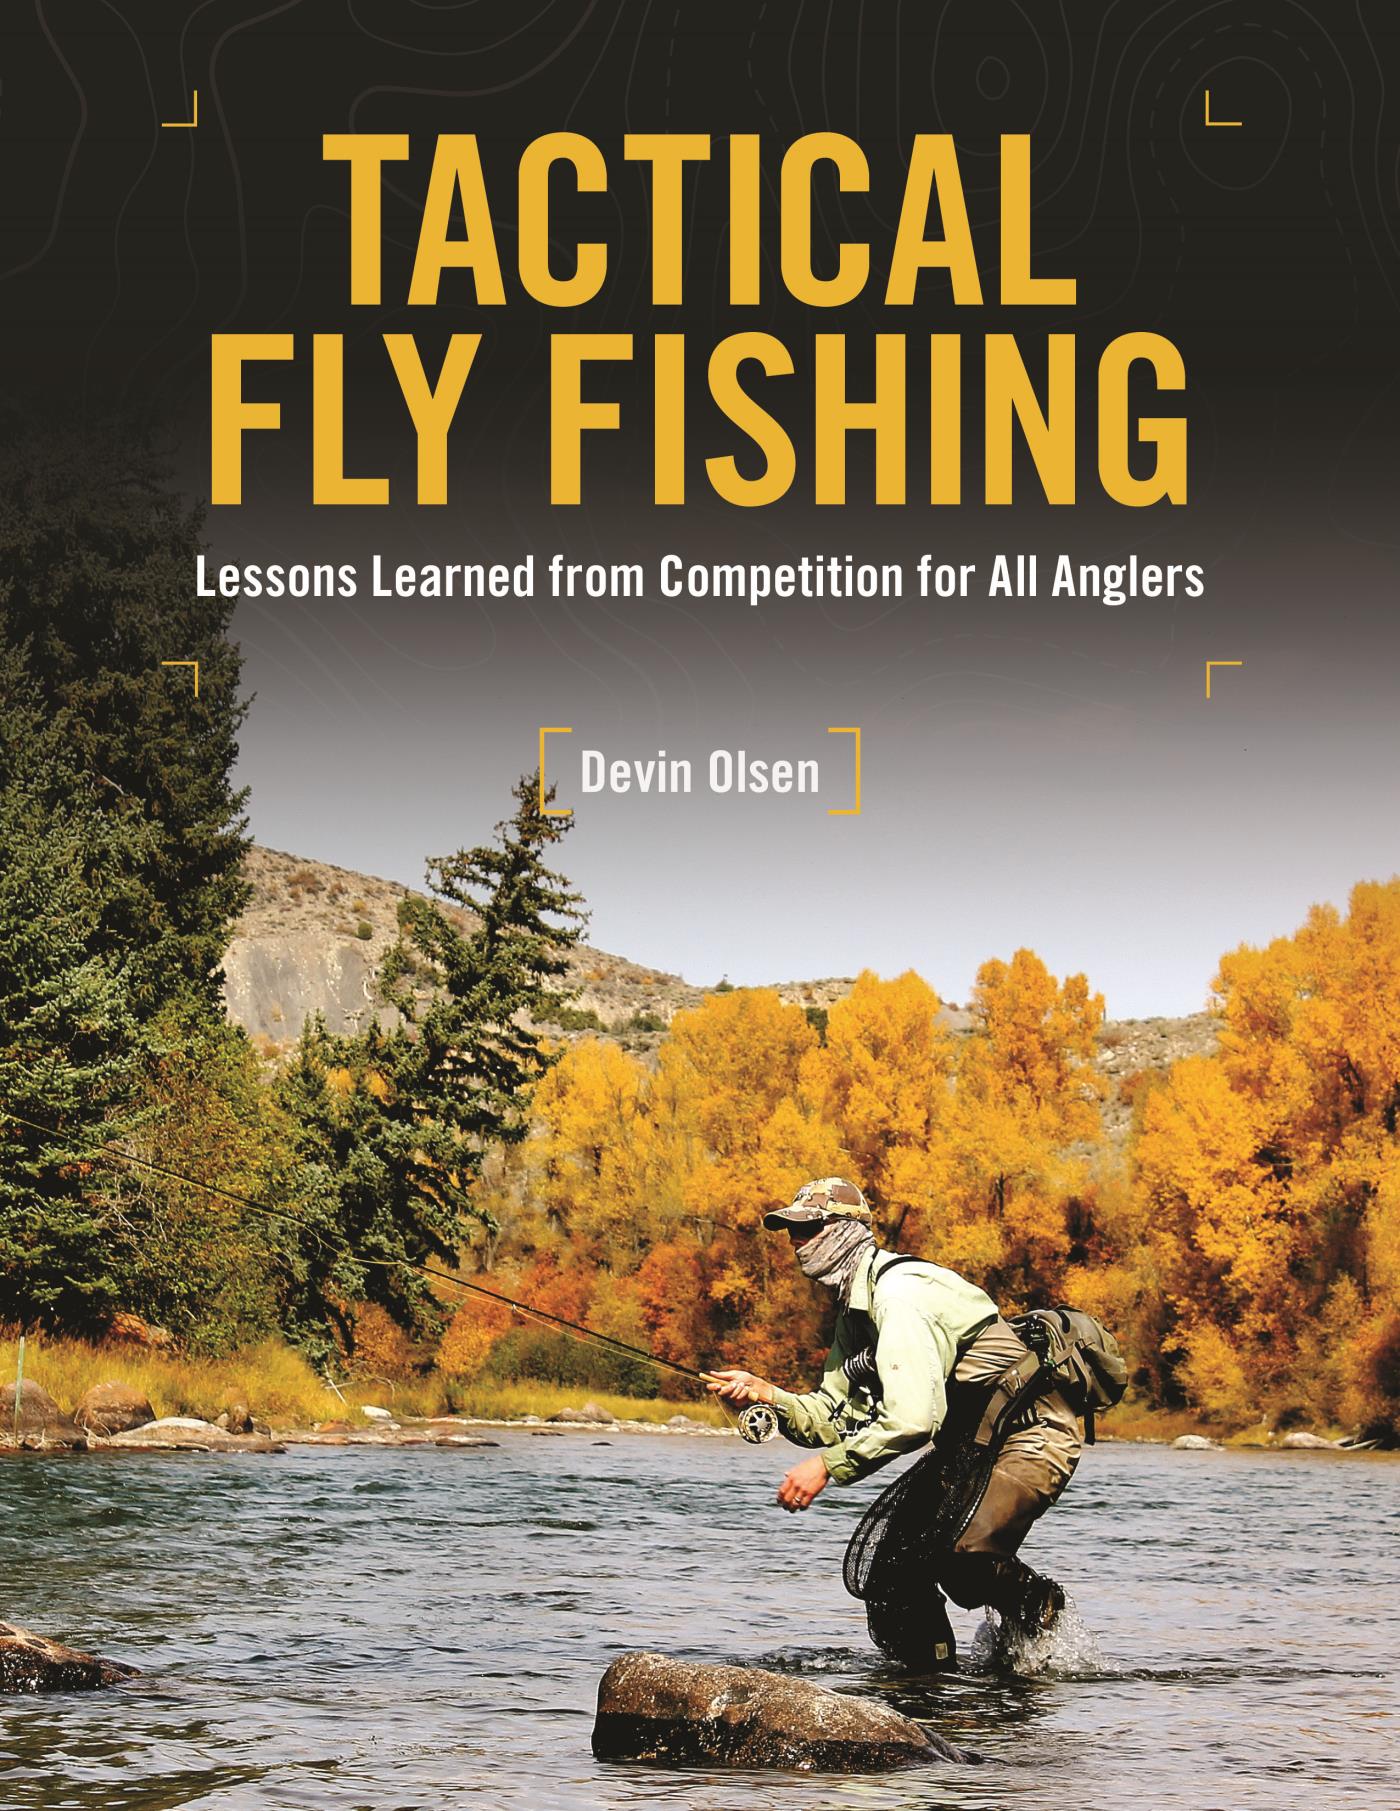 Tactical Fly Fishing by Olsen, Devin (ebook)